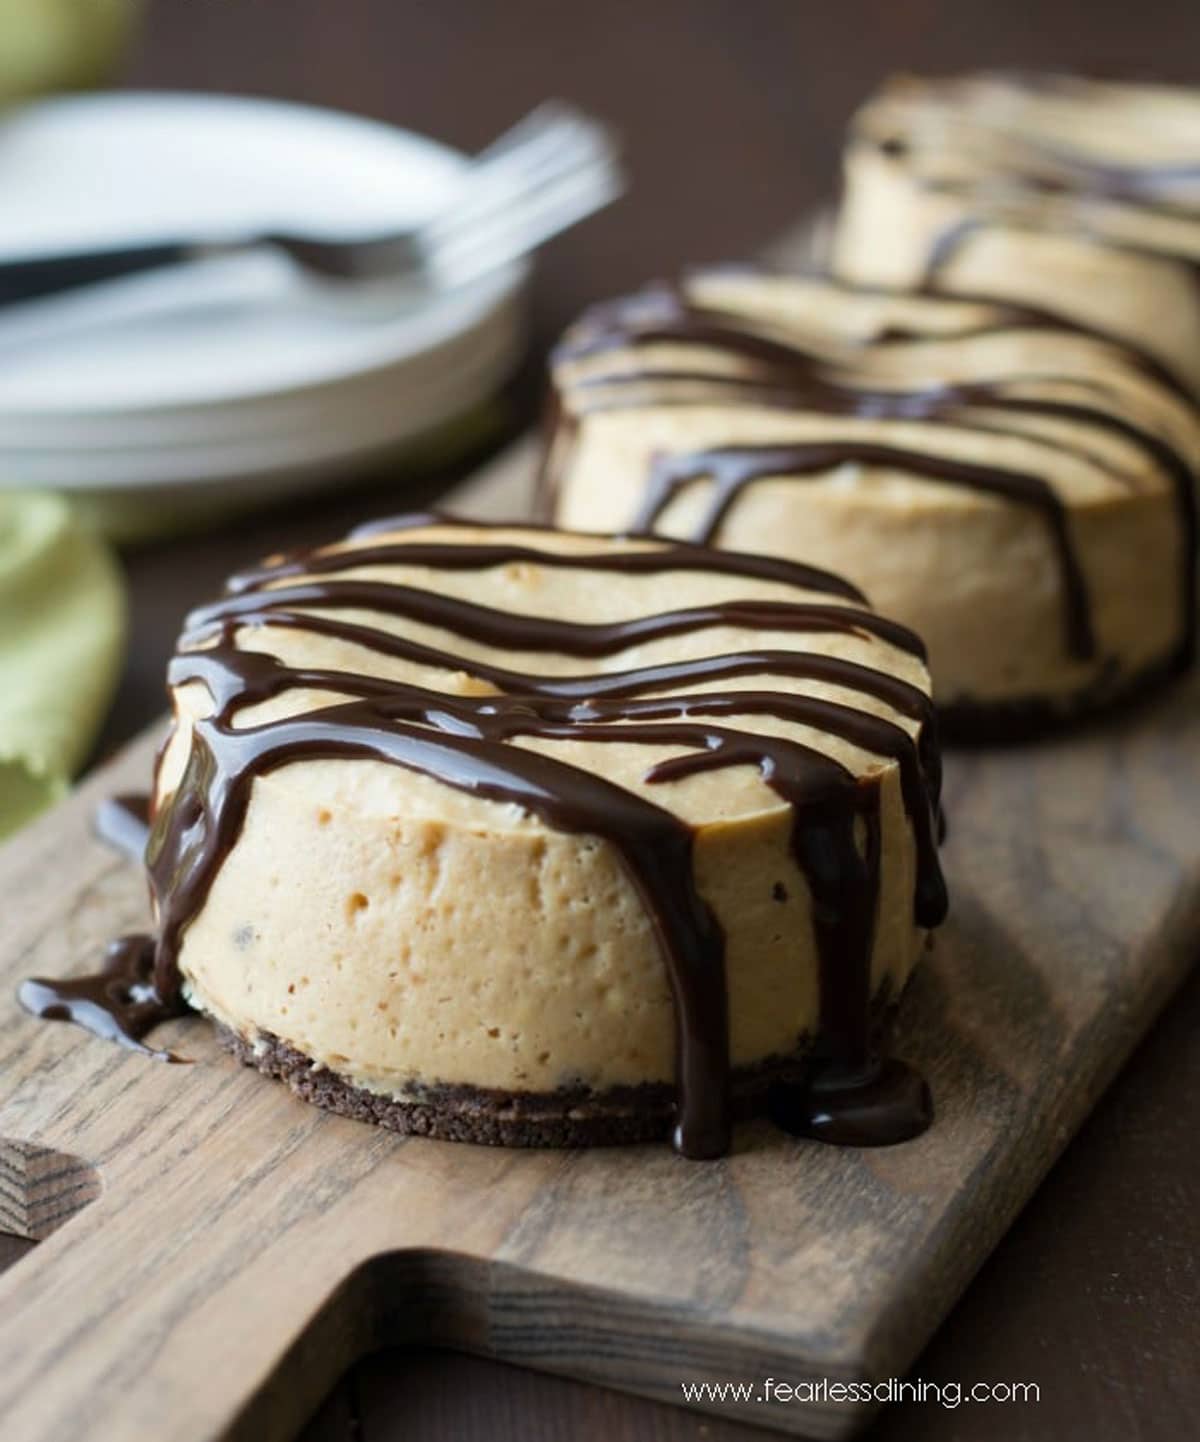 Peanut butter cheesecakes on a wooden tray.